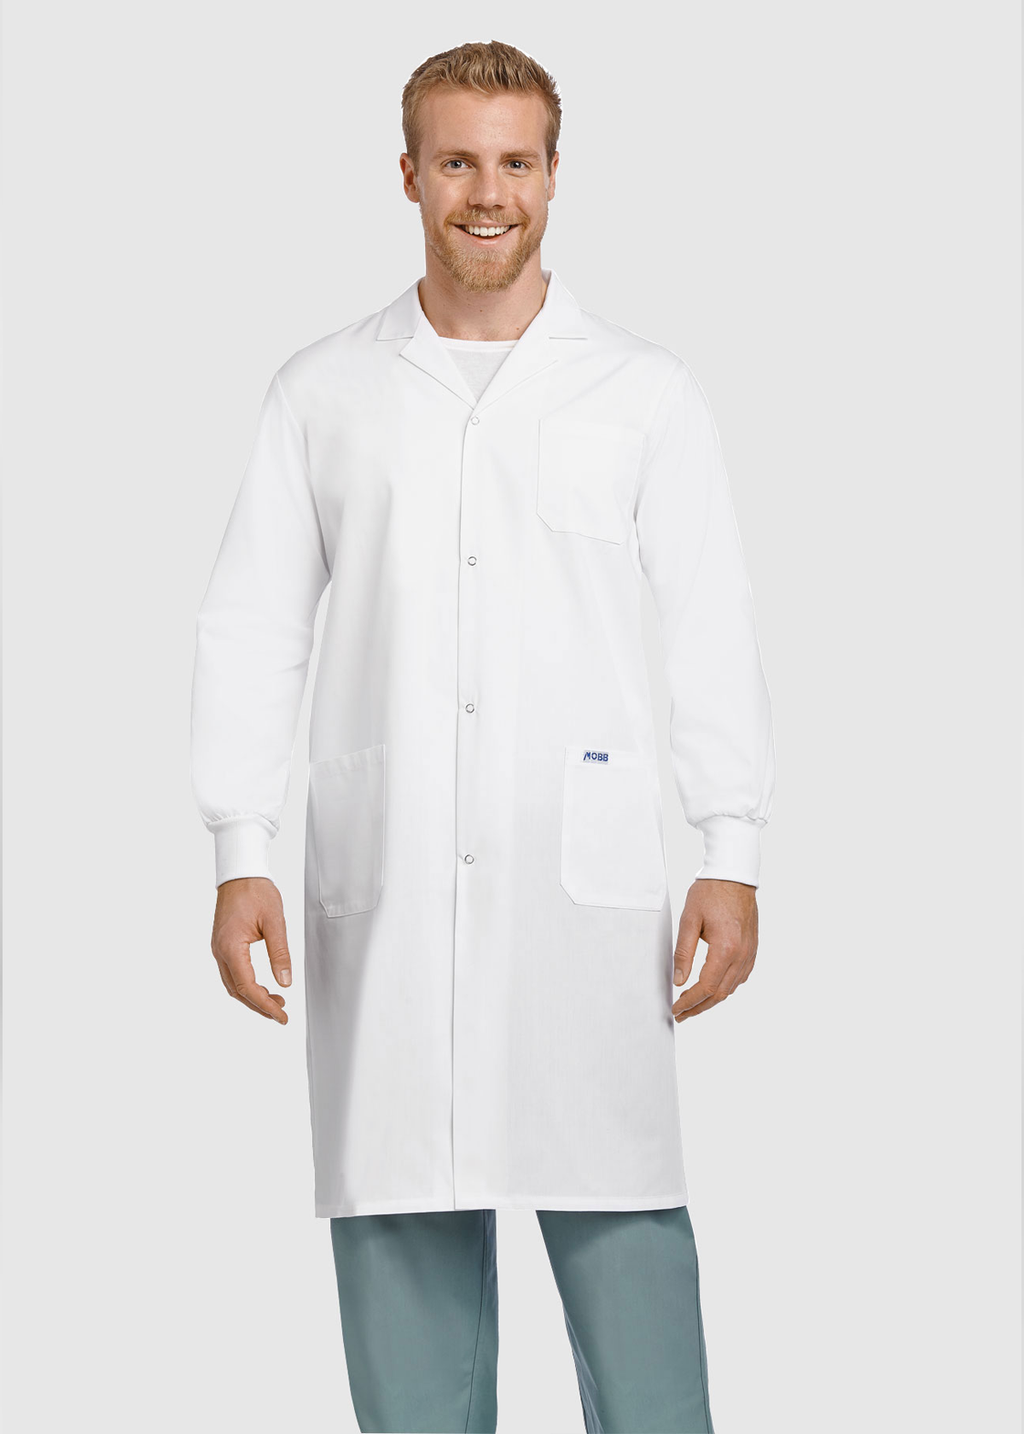 Product - MOBB Full Length Unisex Snap Lab Coat with Knitted Cuffs